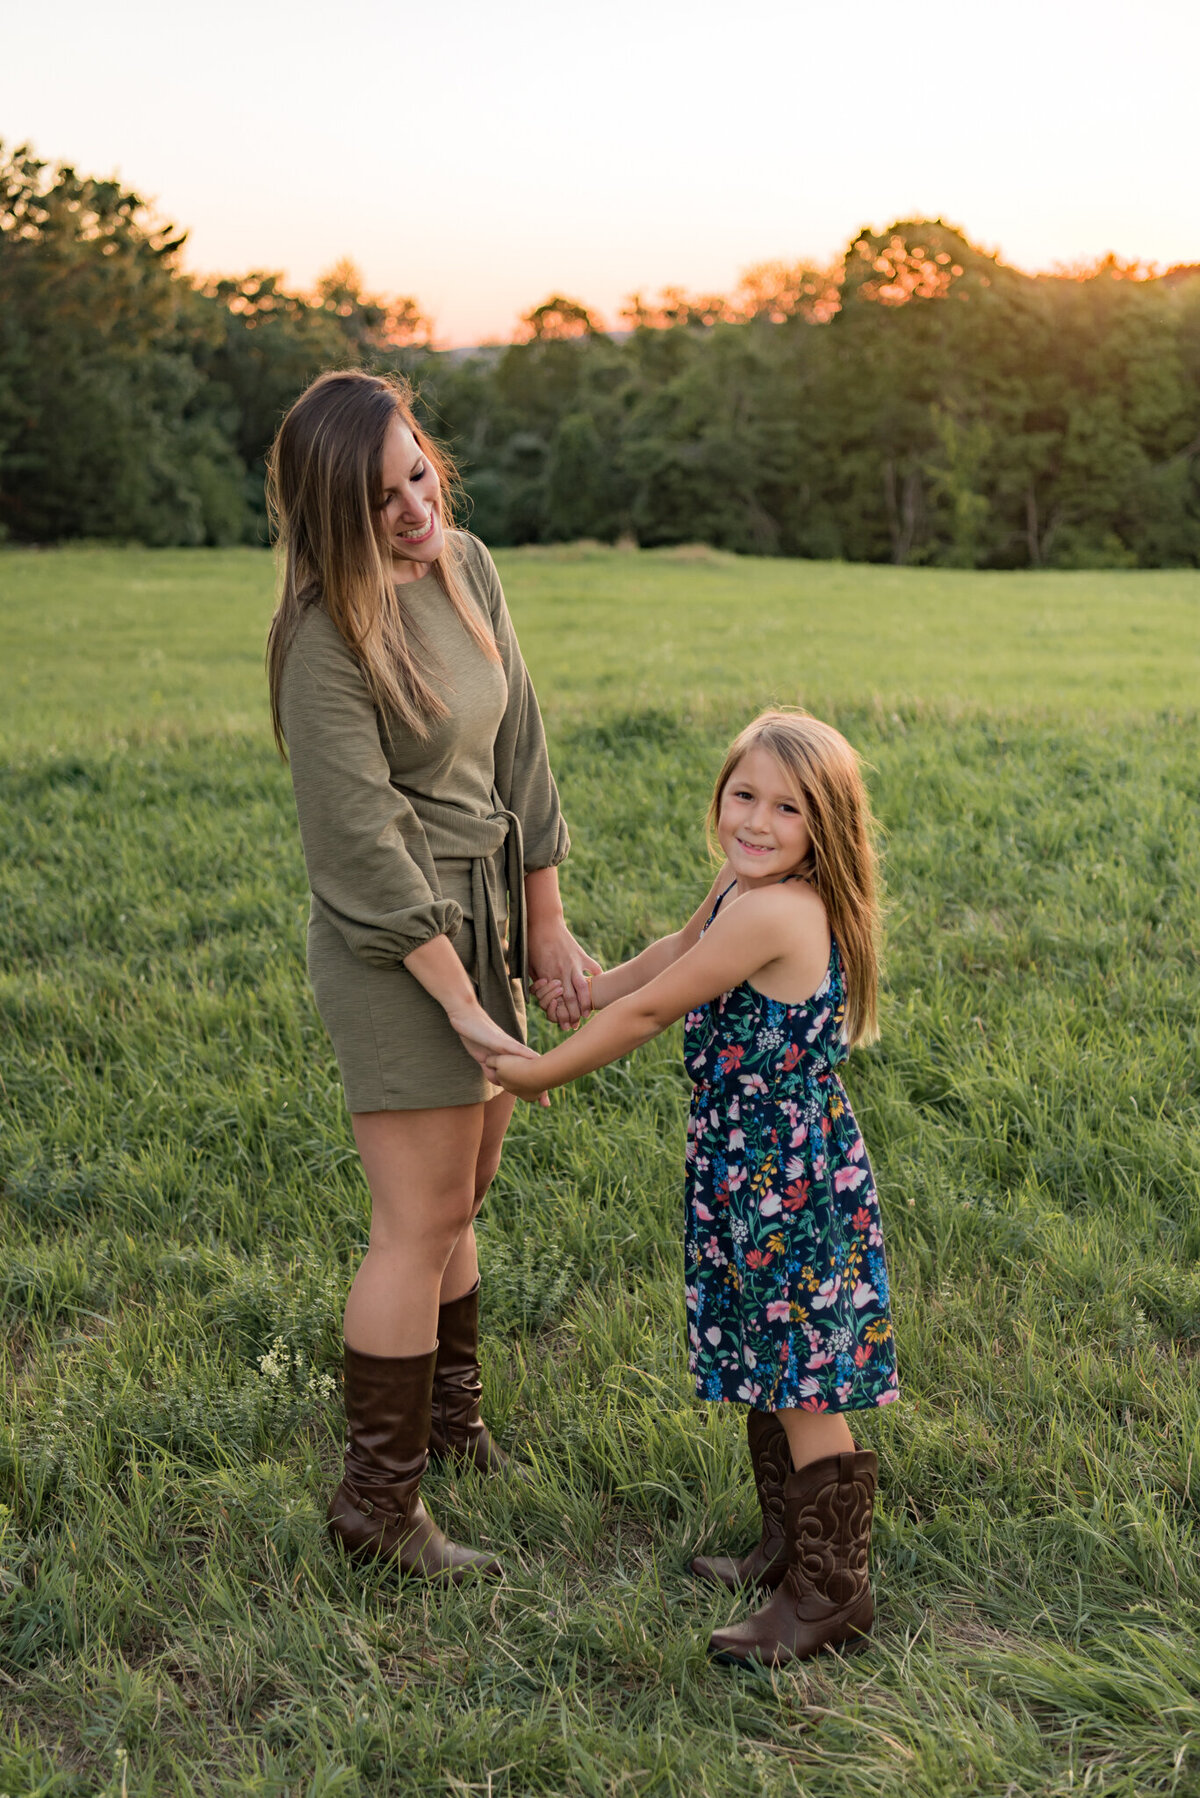 Mother and daughter are holding hands in a green field with the sun setting behind them. The mother is smiling at her daughter while the daughter looks at camera.